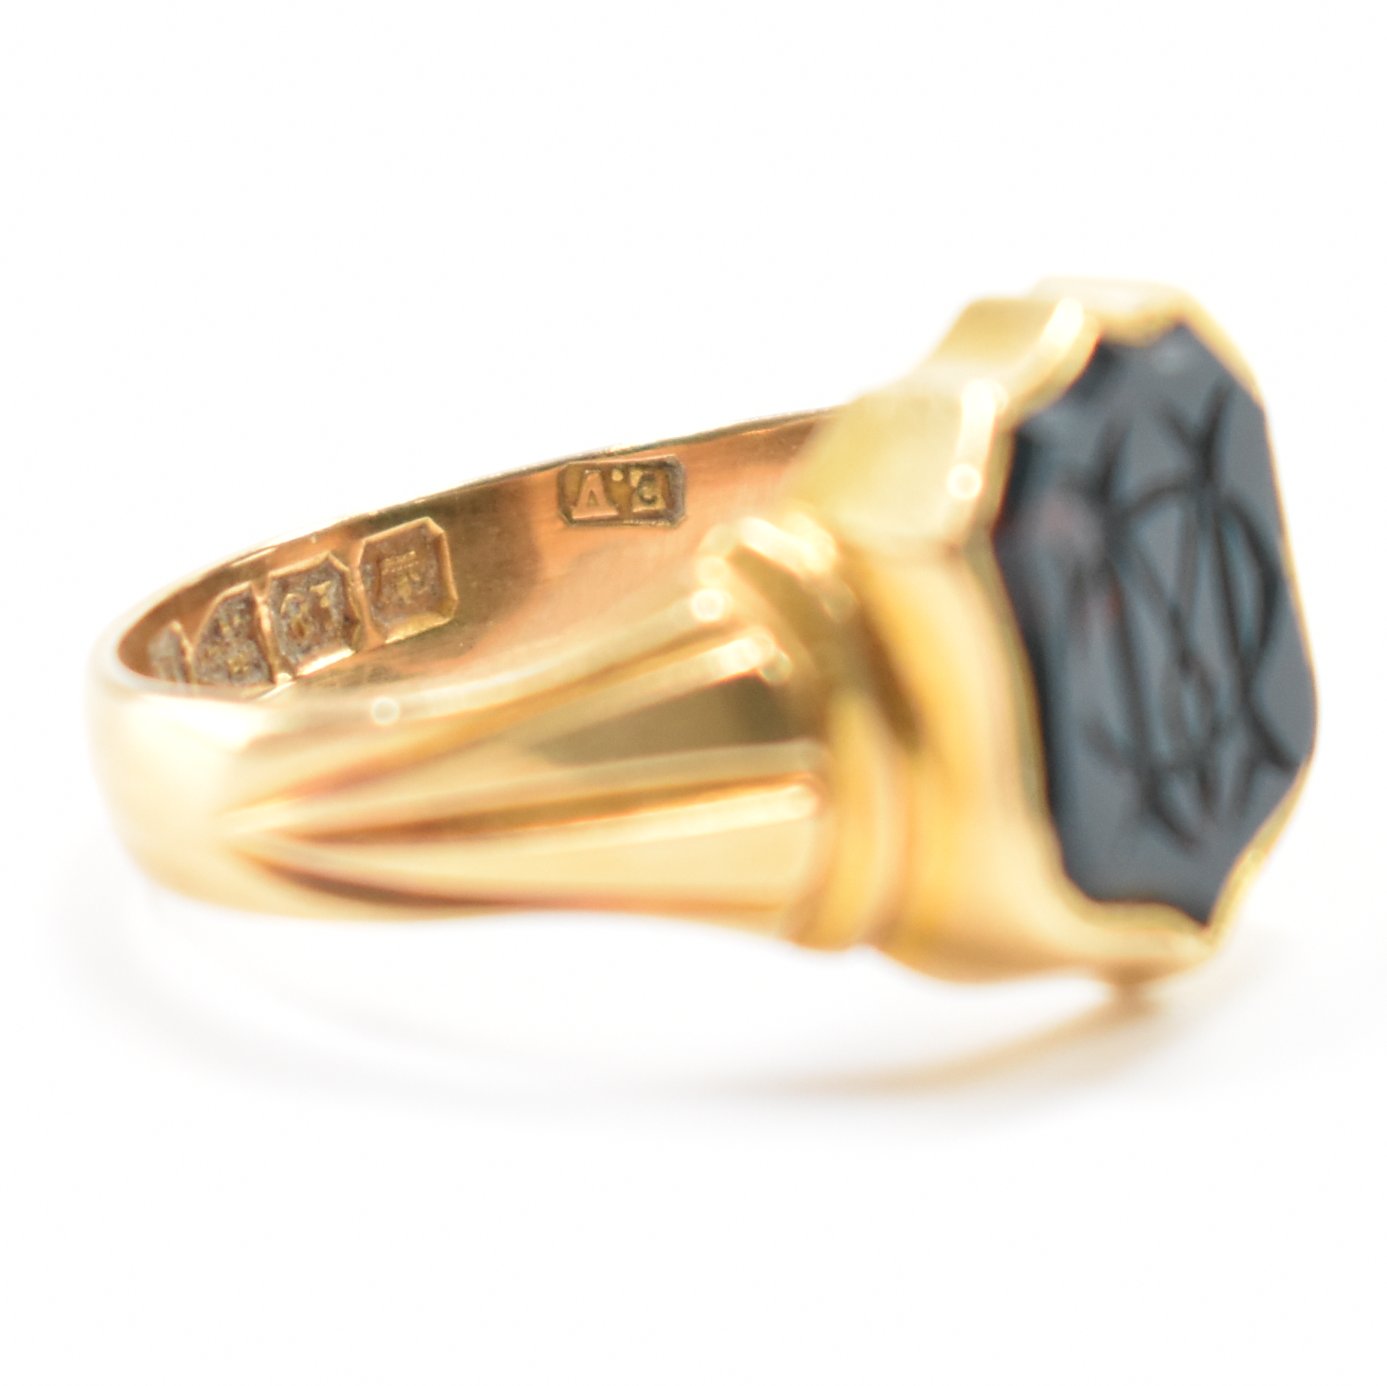 VICTORIAN 18CT GOLD & BLOOD STONE SIGNET RING - Image 6 of 9